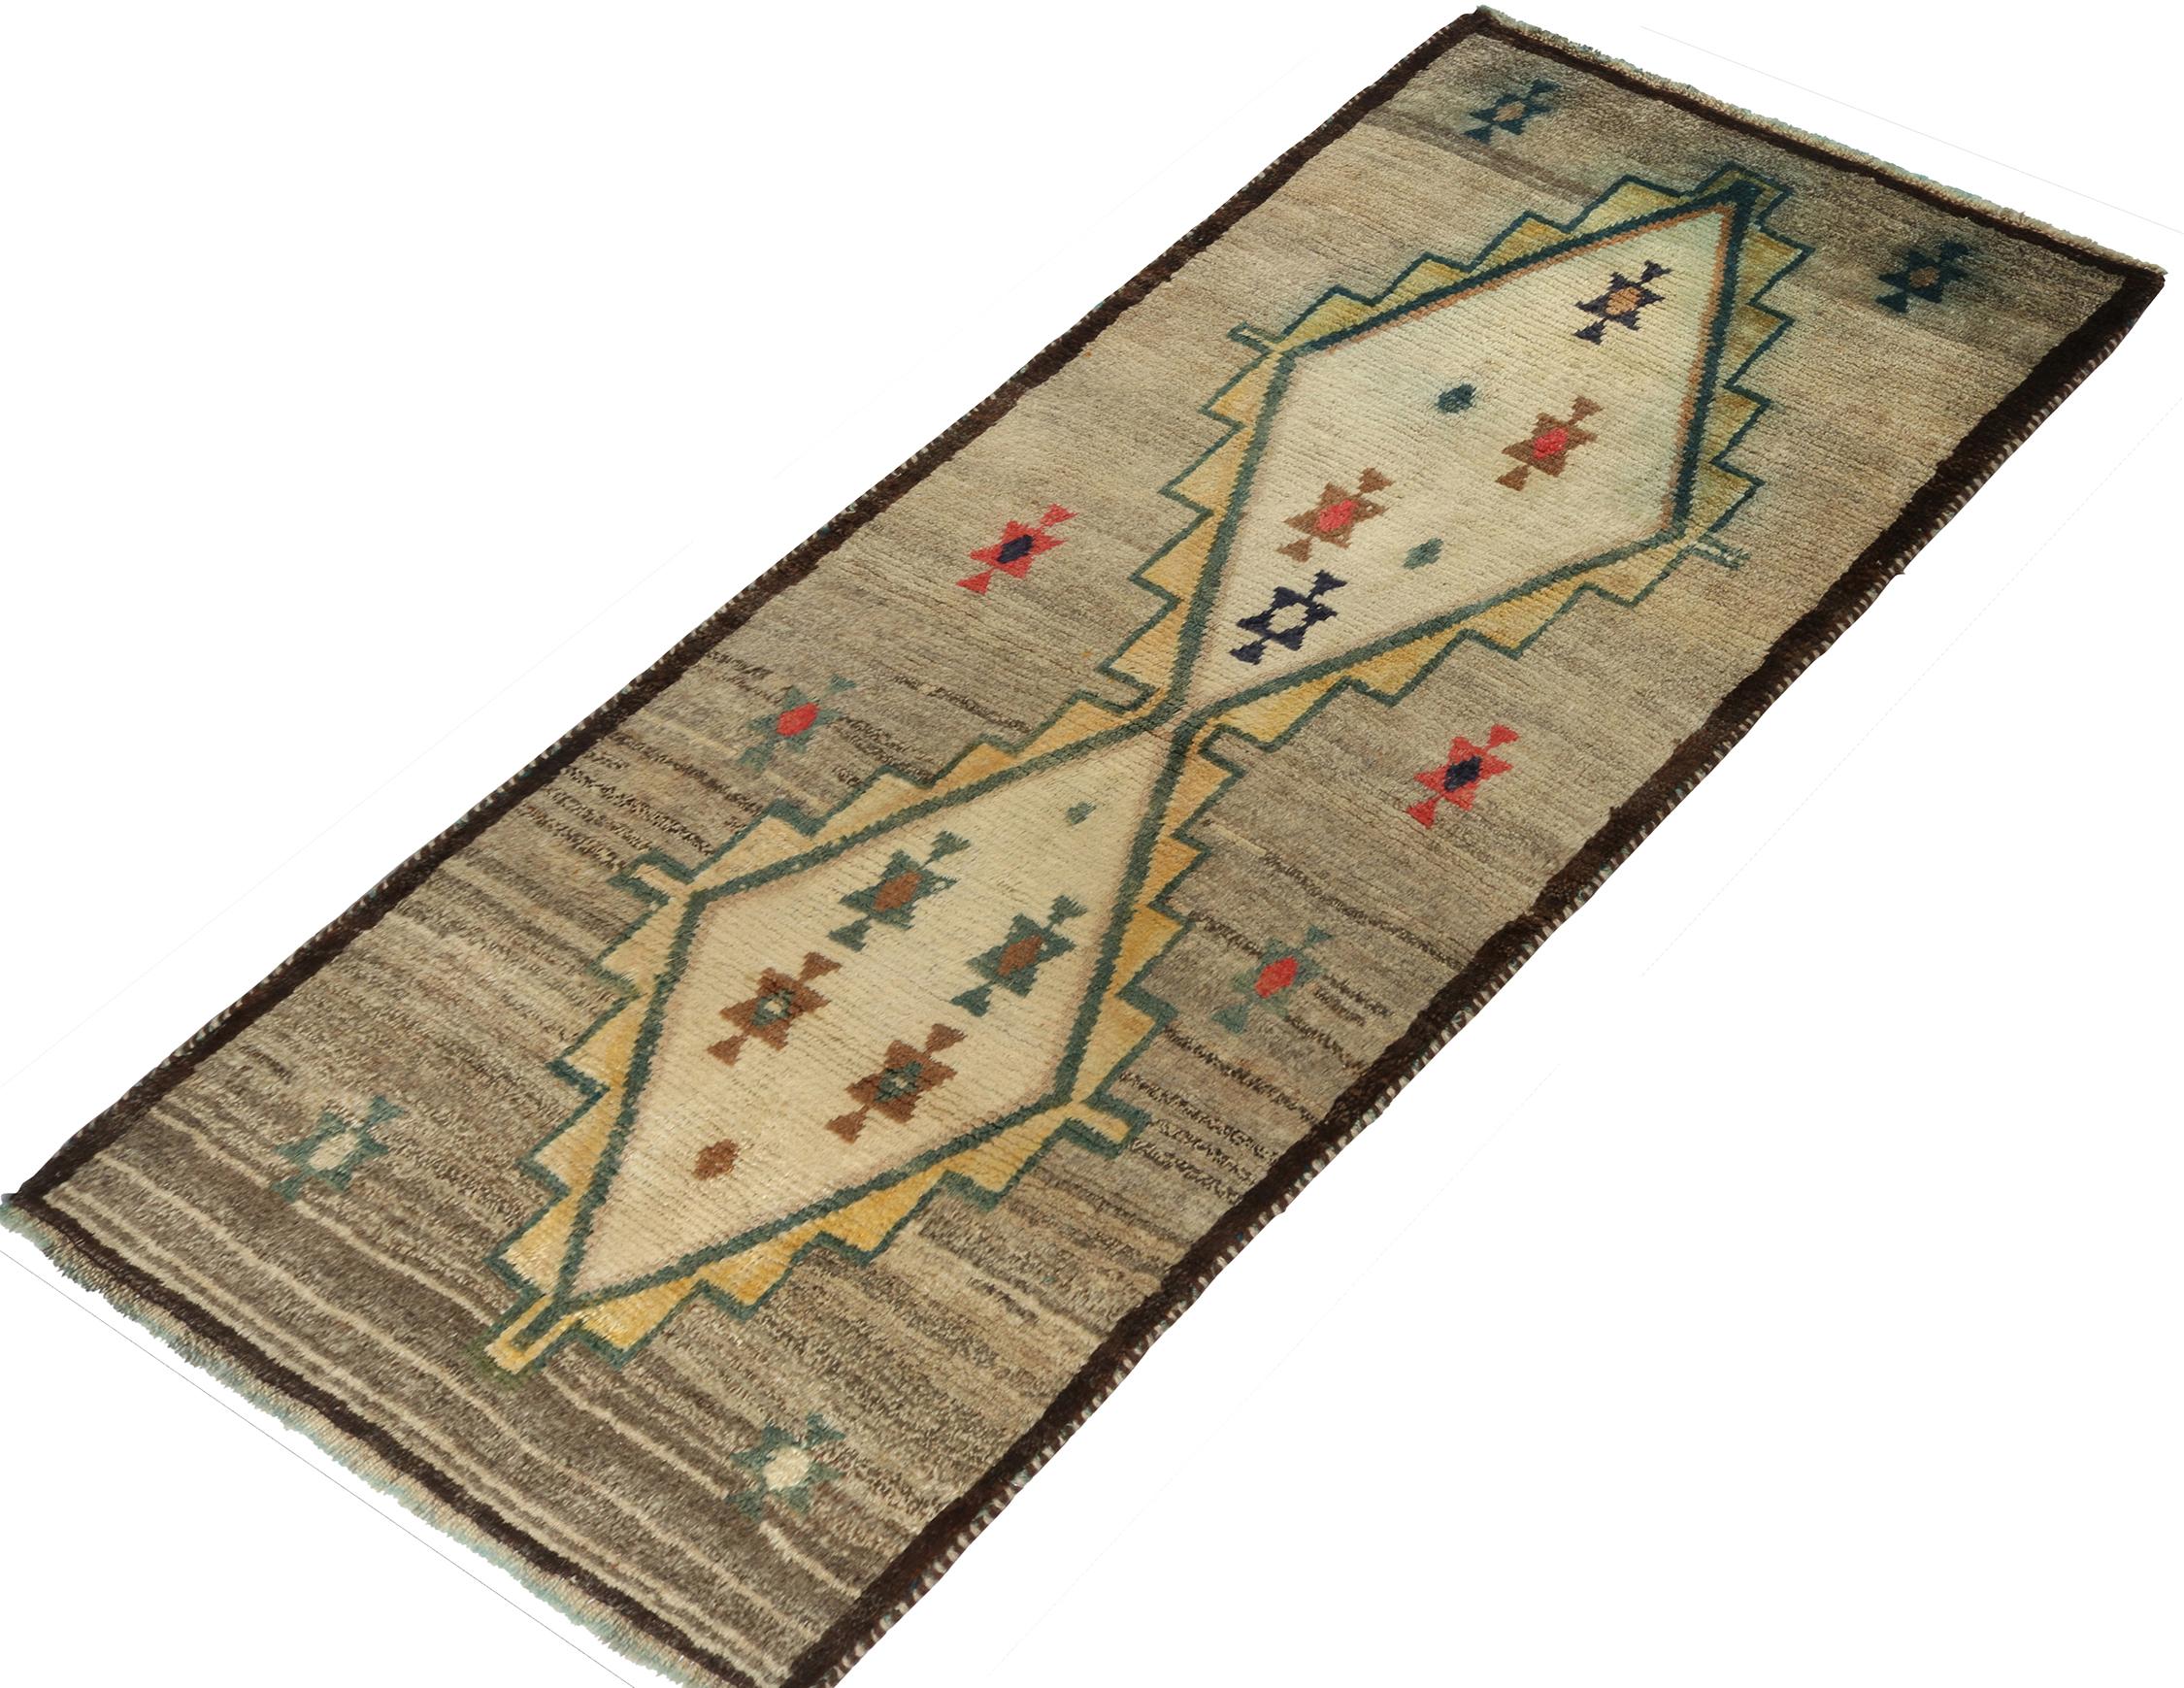 A vintage 3x6 Persian Gabbeh runner, from the latest grand entry to Rug & Kilim’s curation of rare tribal pieces. Hand-knotted in wool circa 1950-1960.

Further On the Design:

This mid-century piece enjoys diamond medallions in gray, gold and